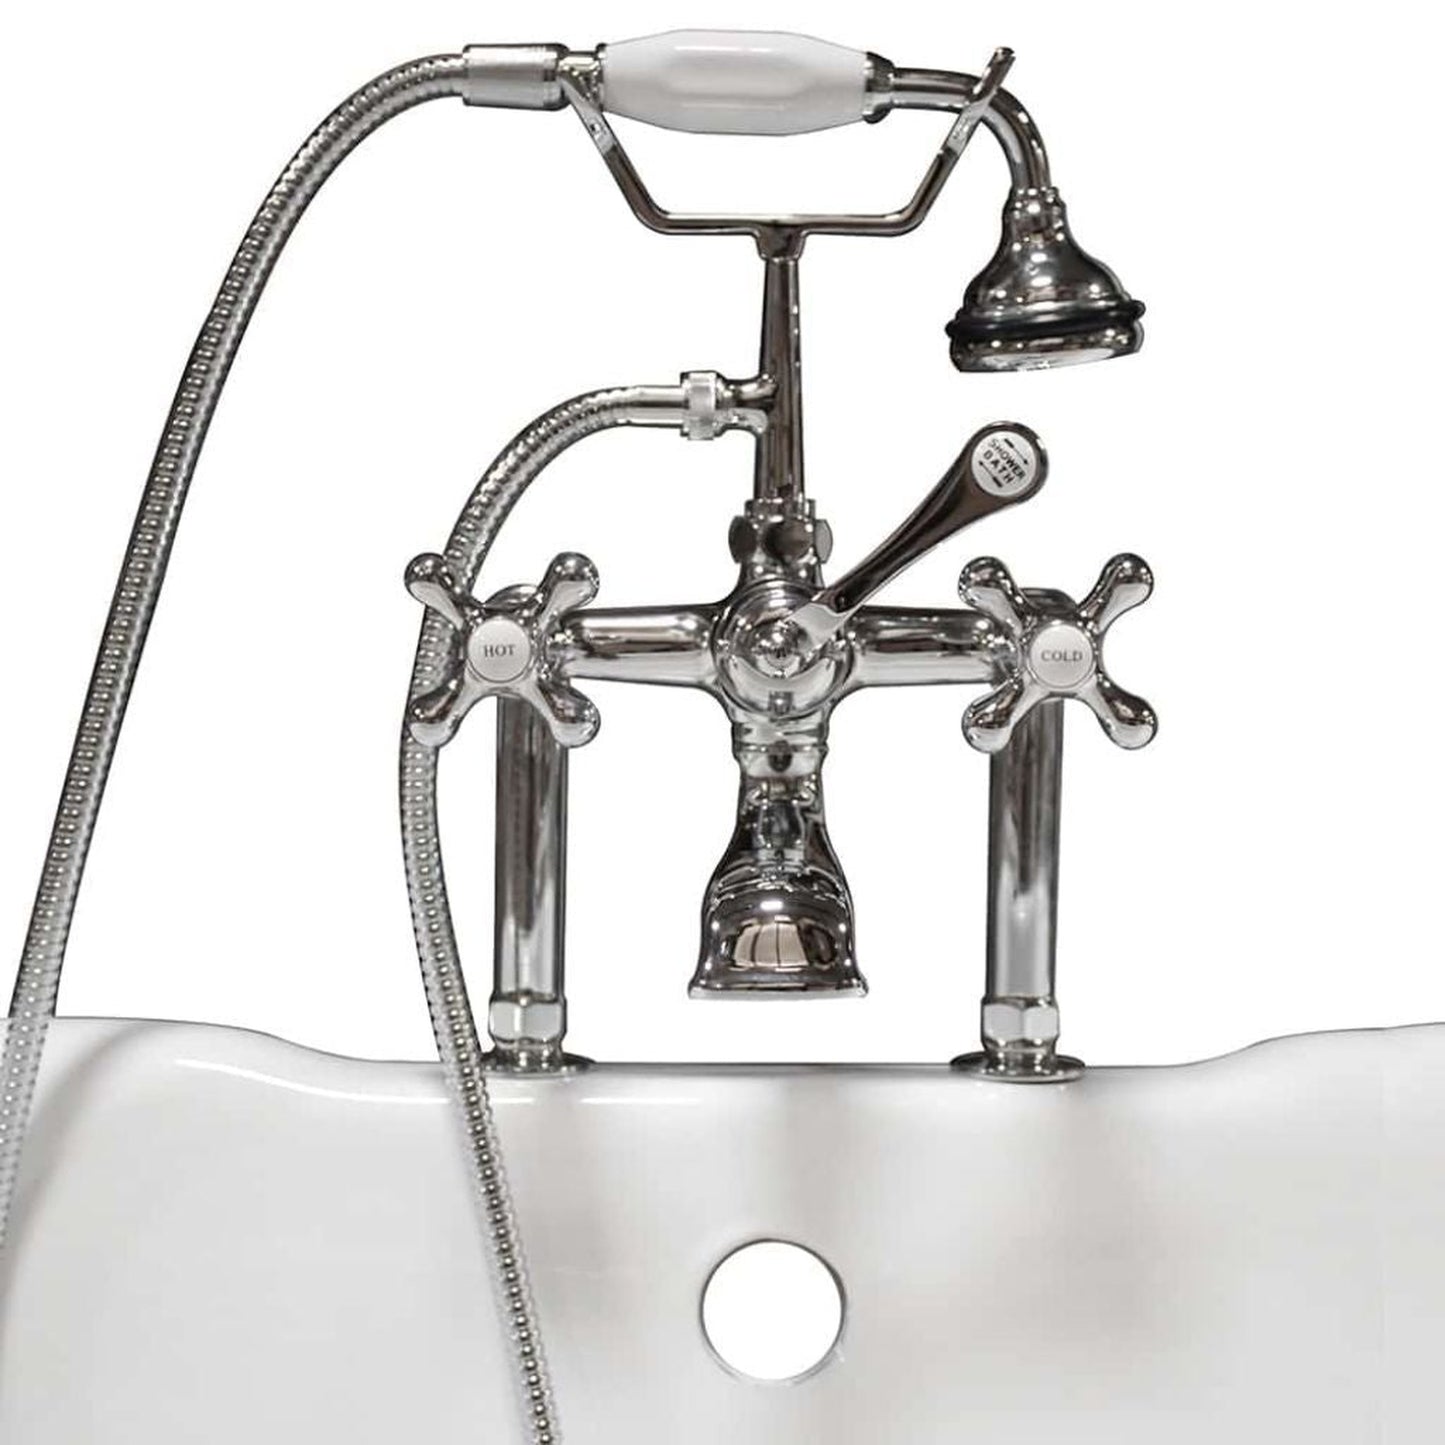 Cambridge Plumbing 6" Risers Polished Chrome Deck Mount British Telephone Style Faucet With Hand Held Shower